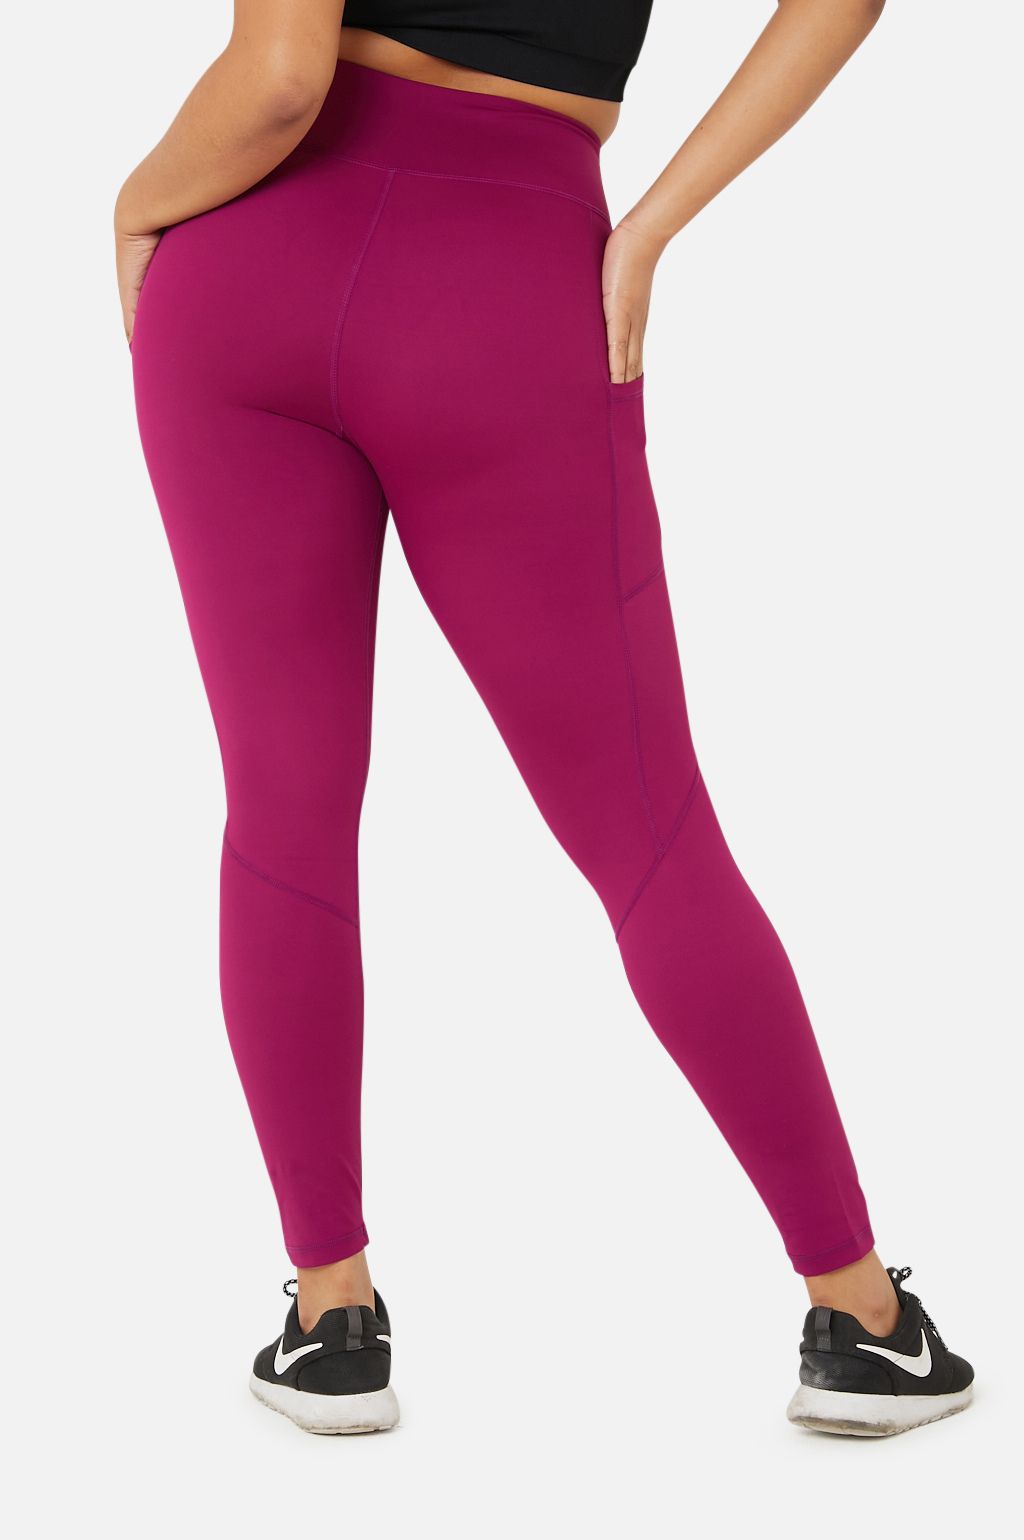 Opaque Raspberry Pink Colored Tights